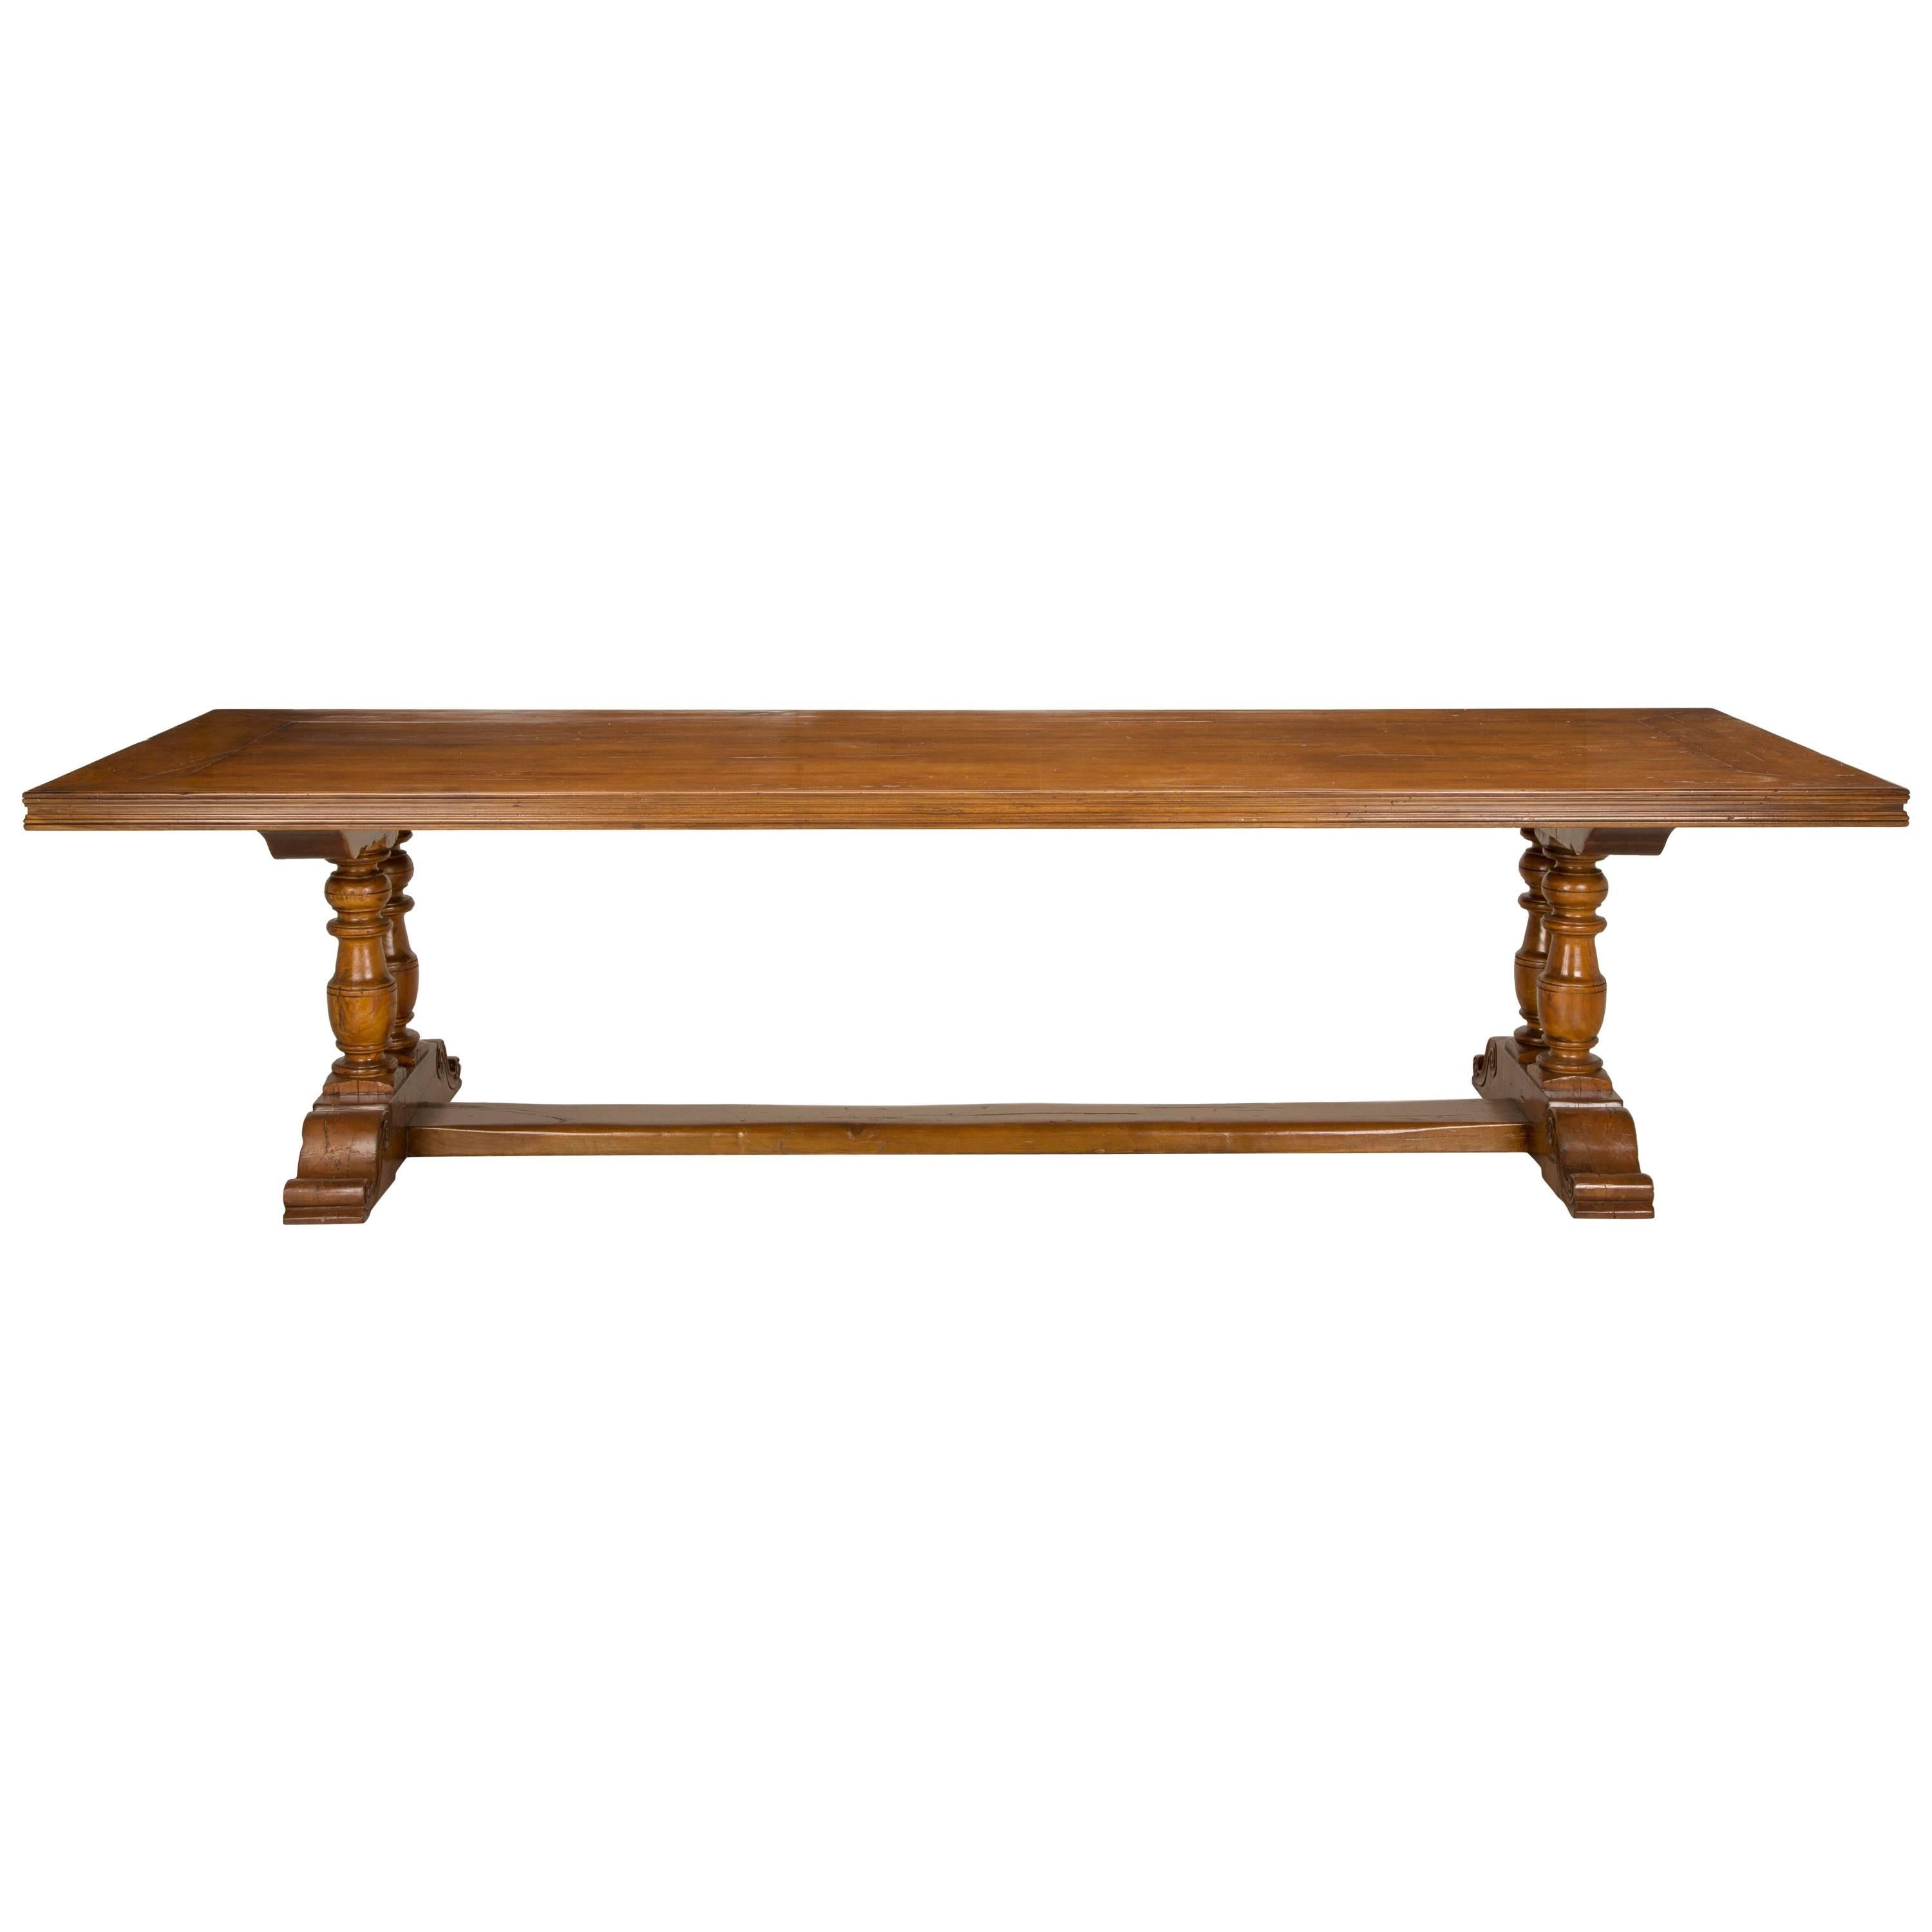 French Inspired Walnut Trestle Style Dining Table By Old Plank in Any Dimension For Sale